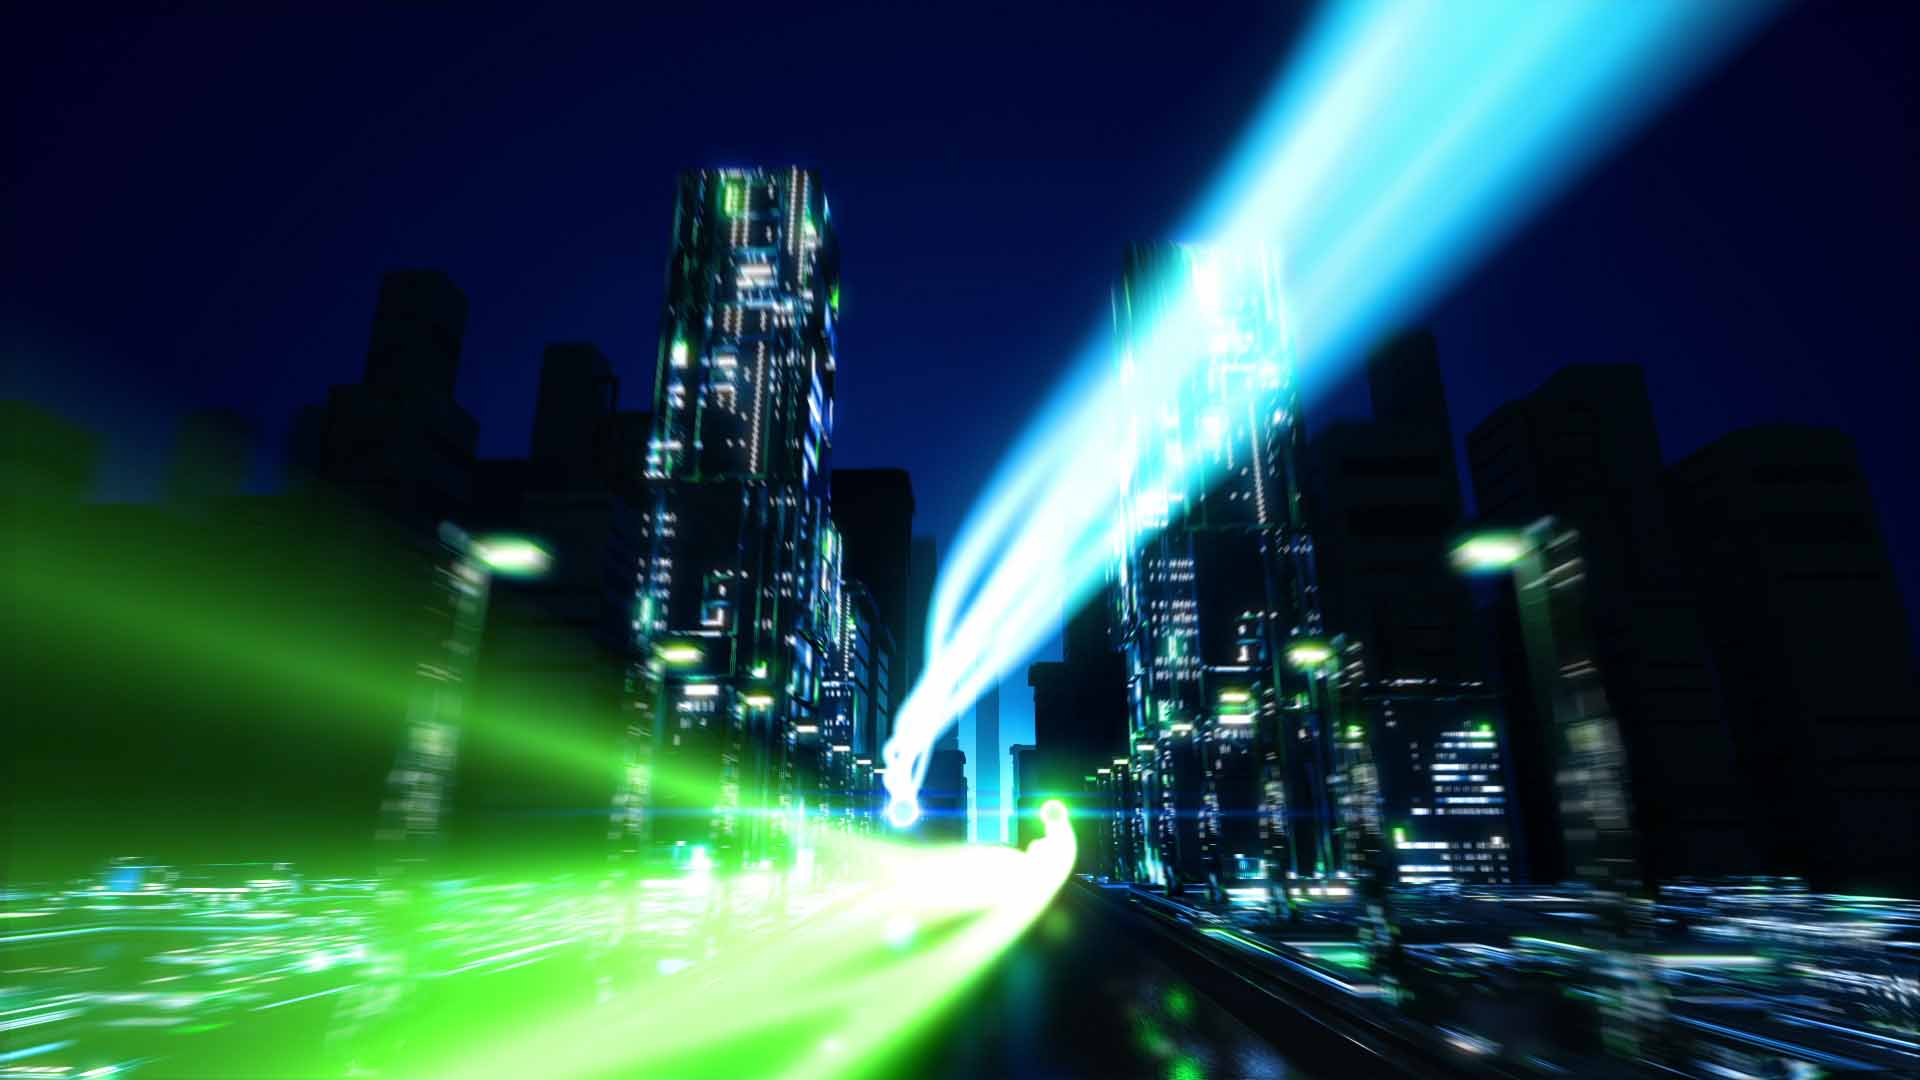 Two animated glowing spheres fly through a futuristic city